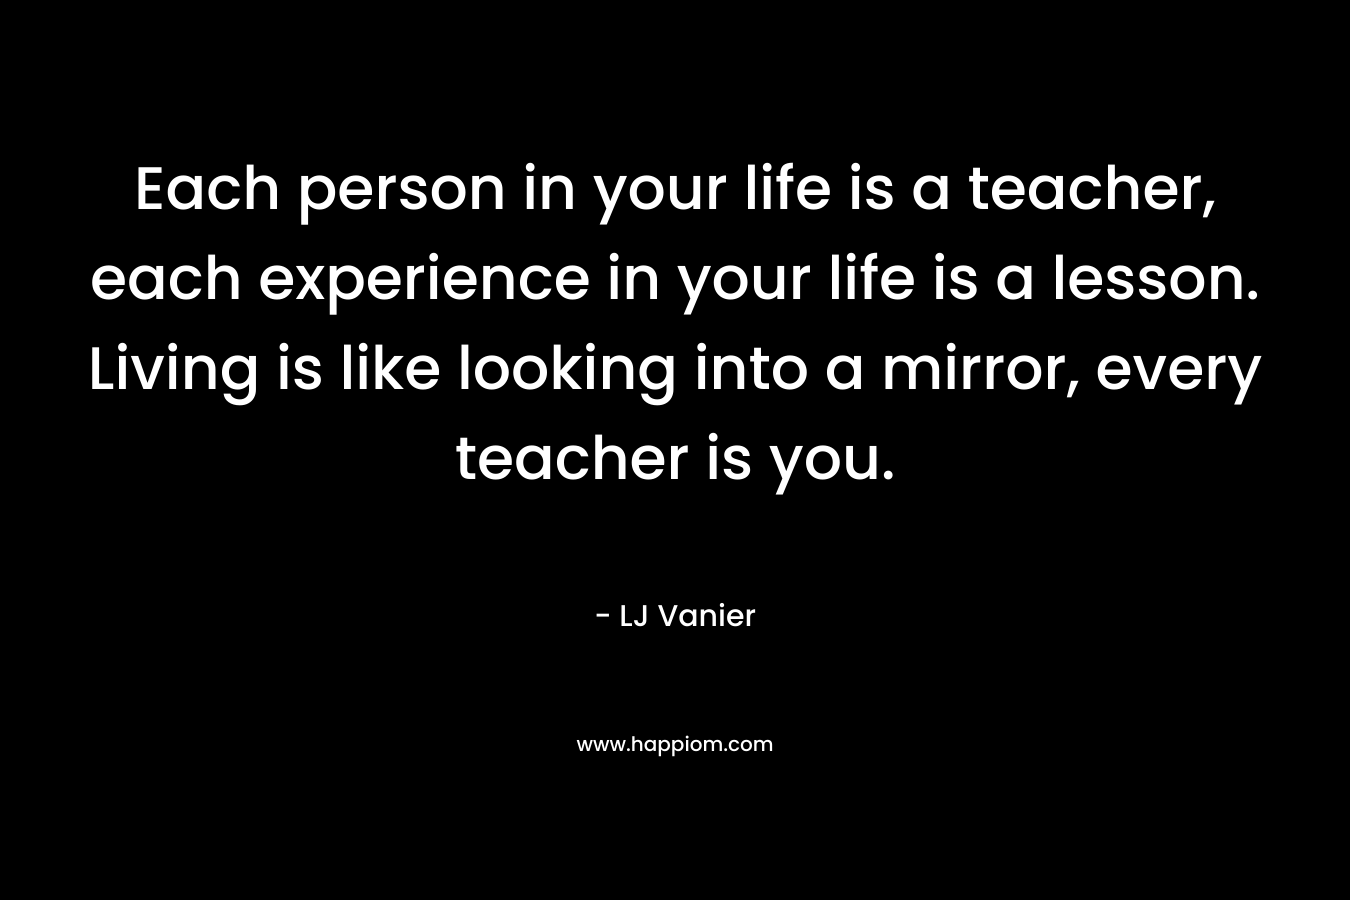 Each person in your life is a teacher, each experience in your life is a lesson. Living is like looking into a mirror, every teacher is you. – LJ Vanier